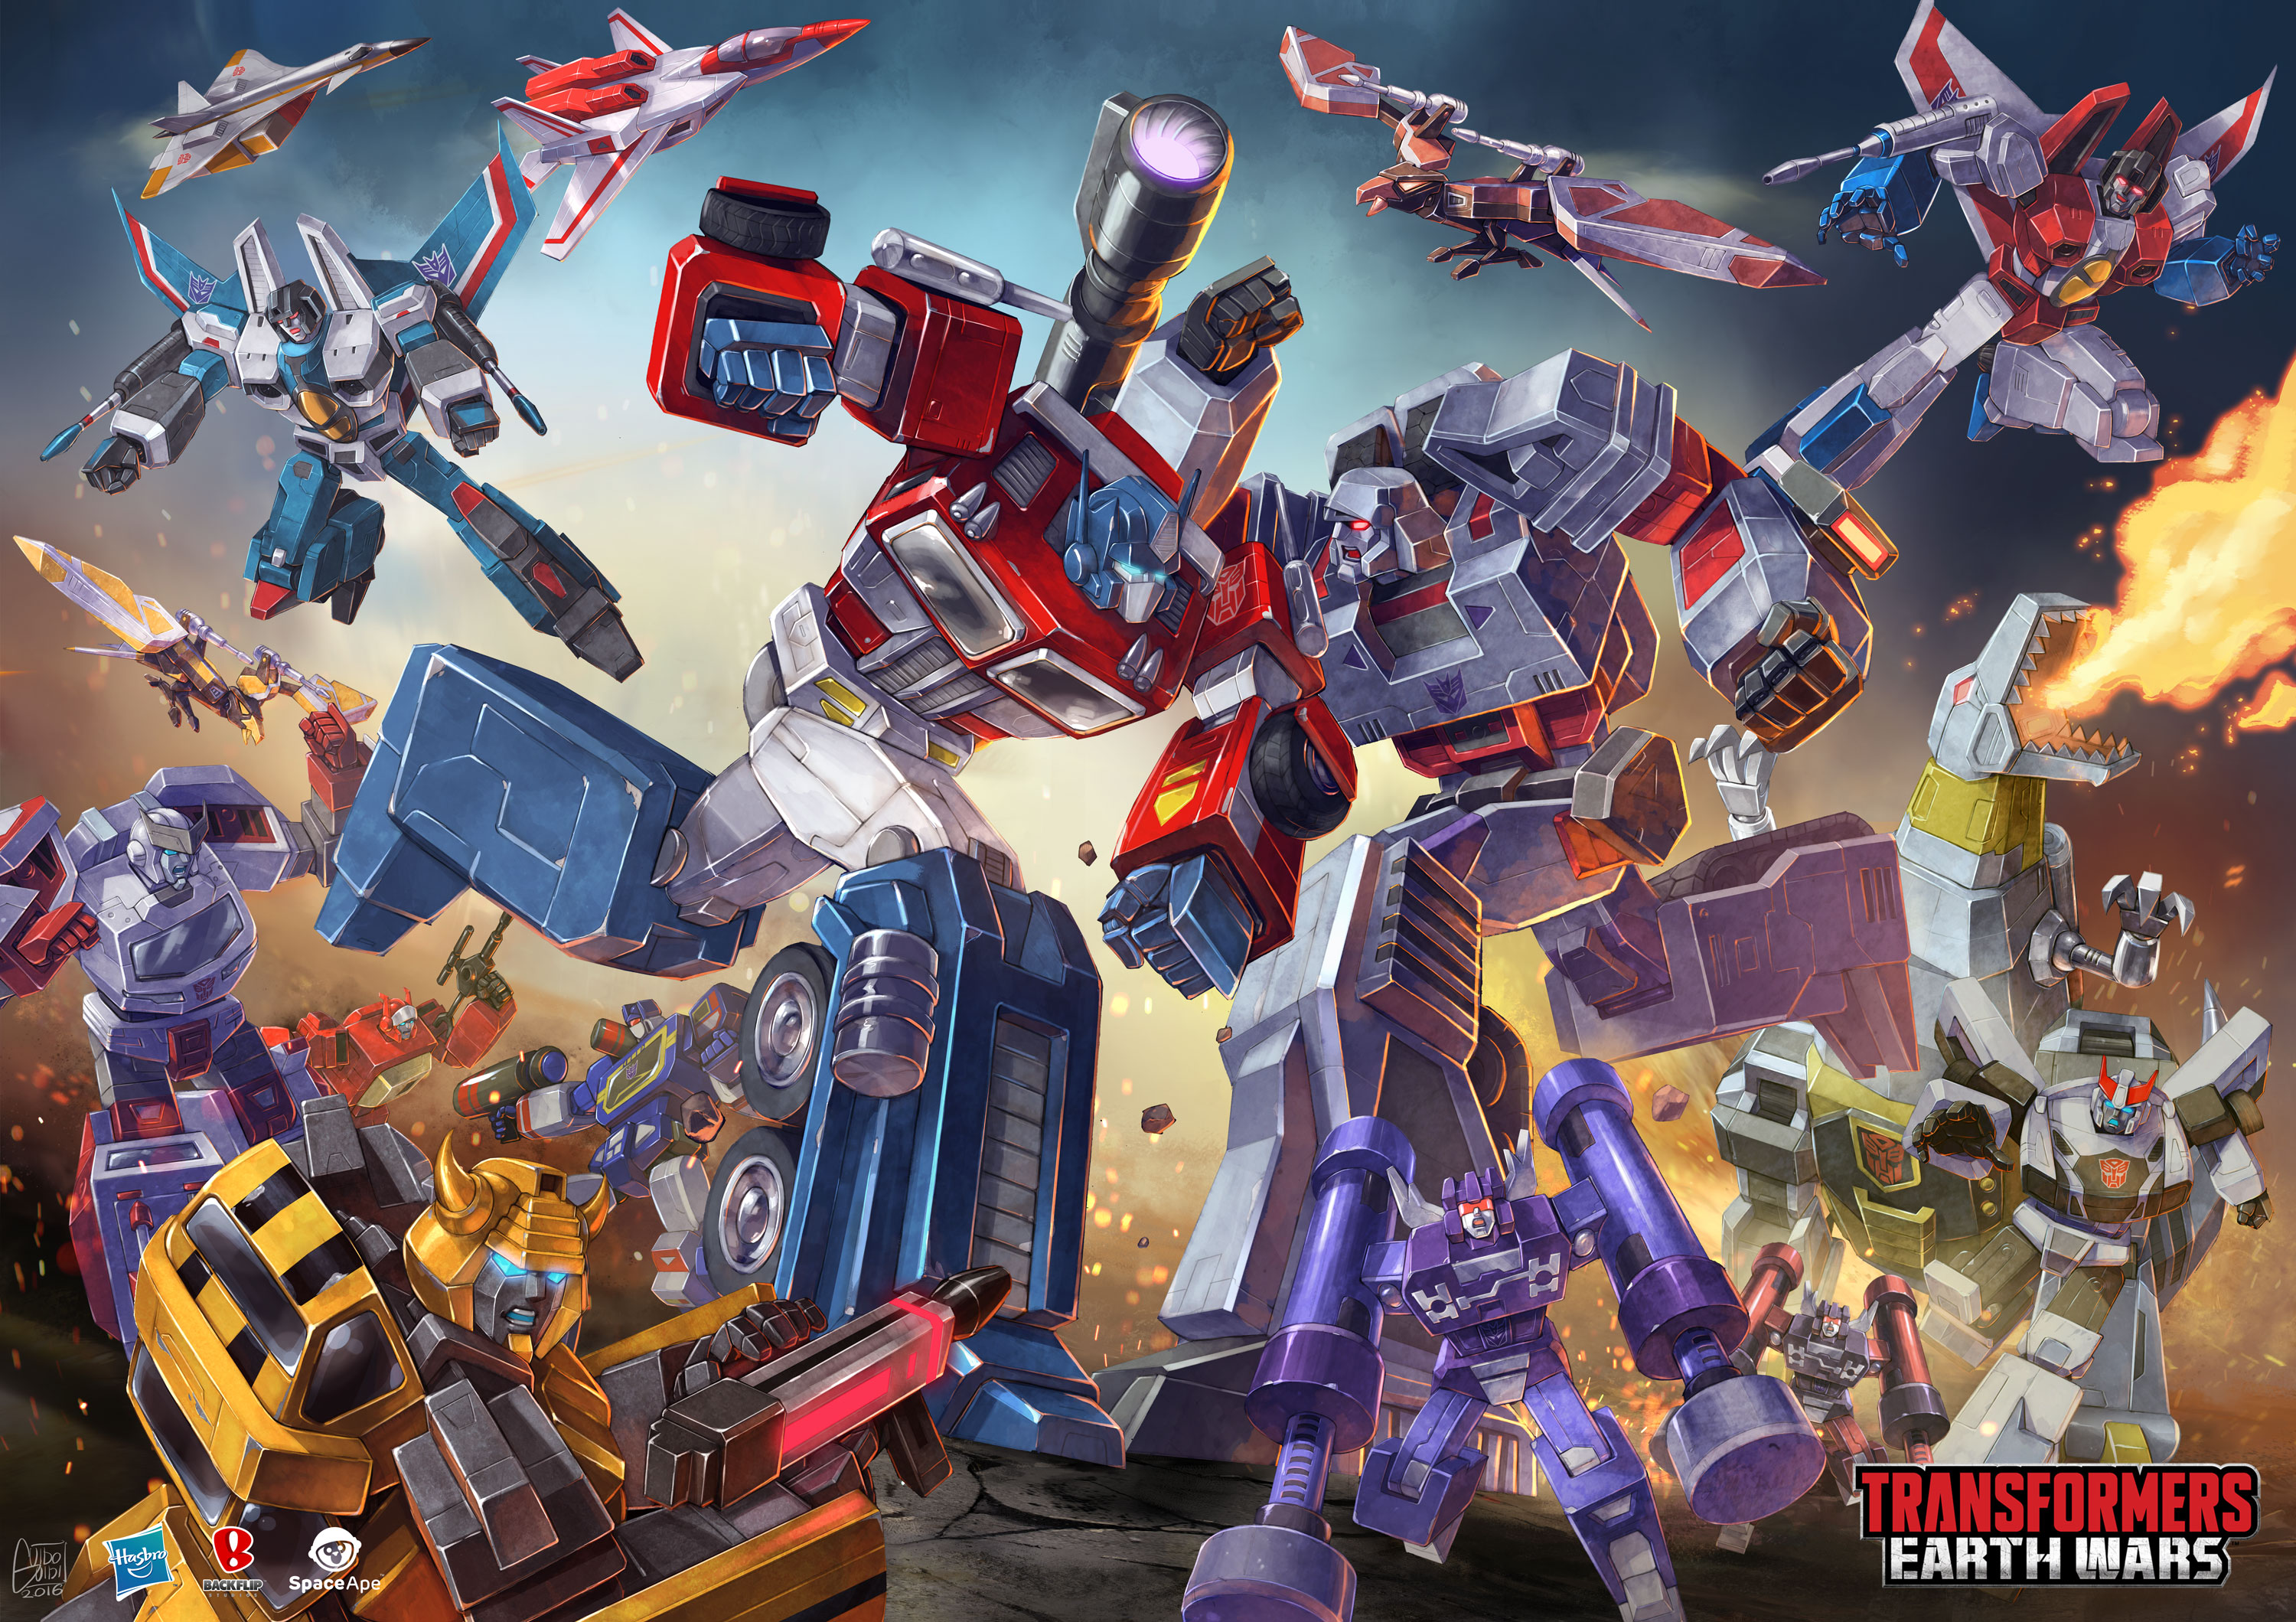 Transformers News: Transformers Earth Wars "Decoy Dash" In-Game Event This Holiday Weekend plus new poster unveiled